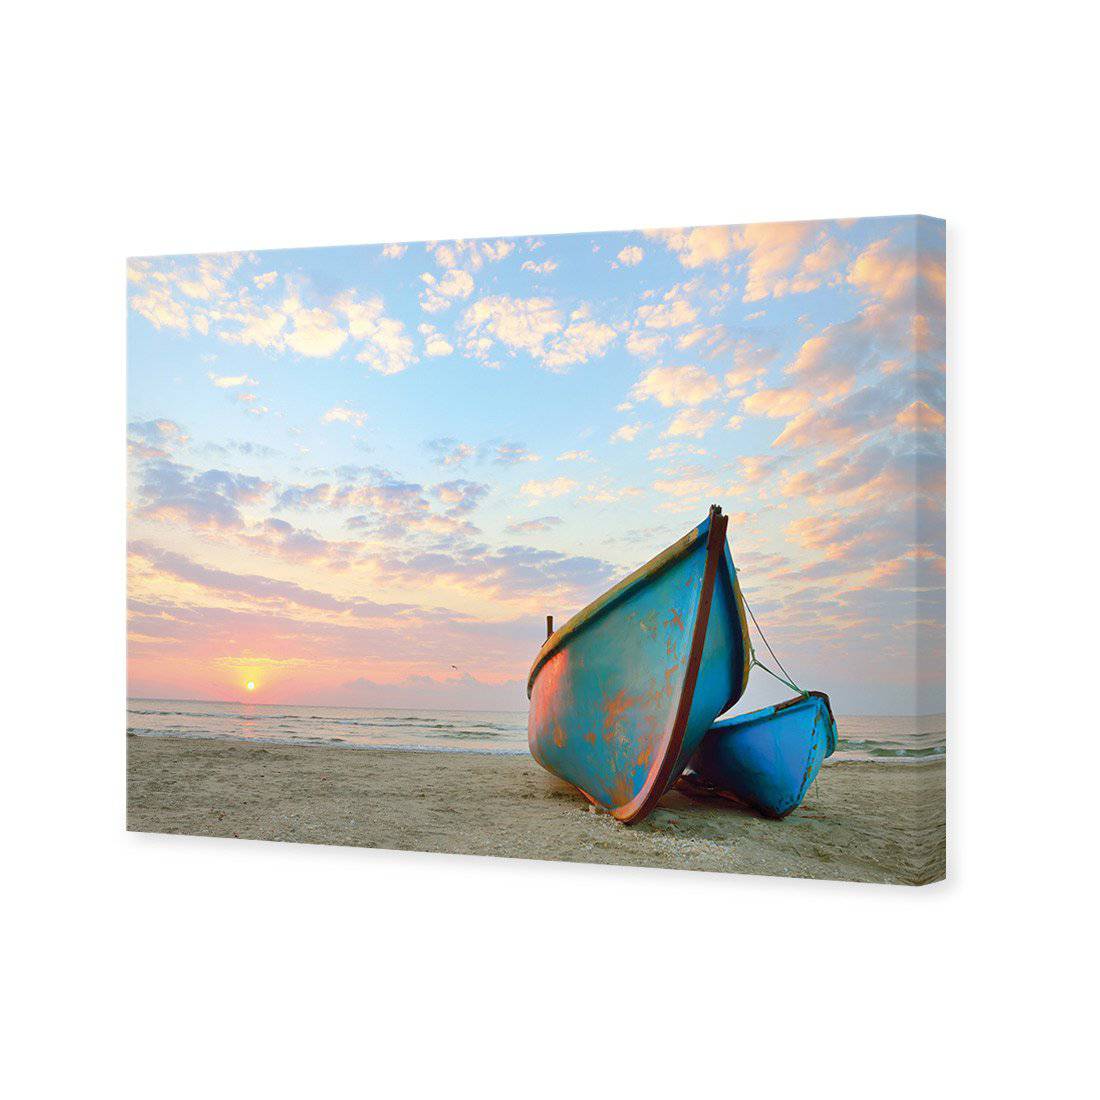 Washed Up Canvas Art-Canvas-Wall Art Designs-45x30cm-Canvas - No Frame-Wall Art Designs